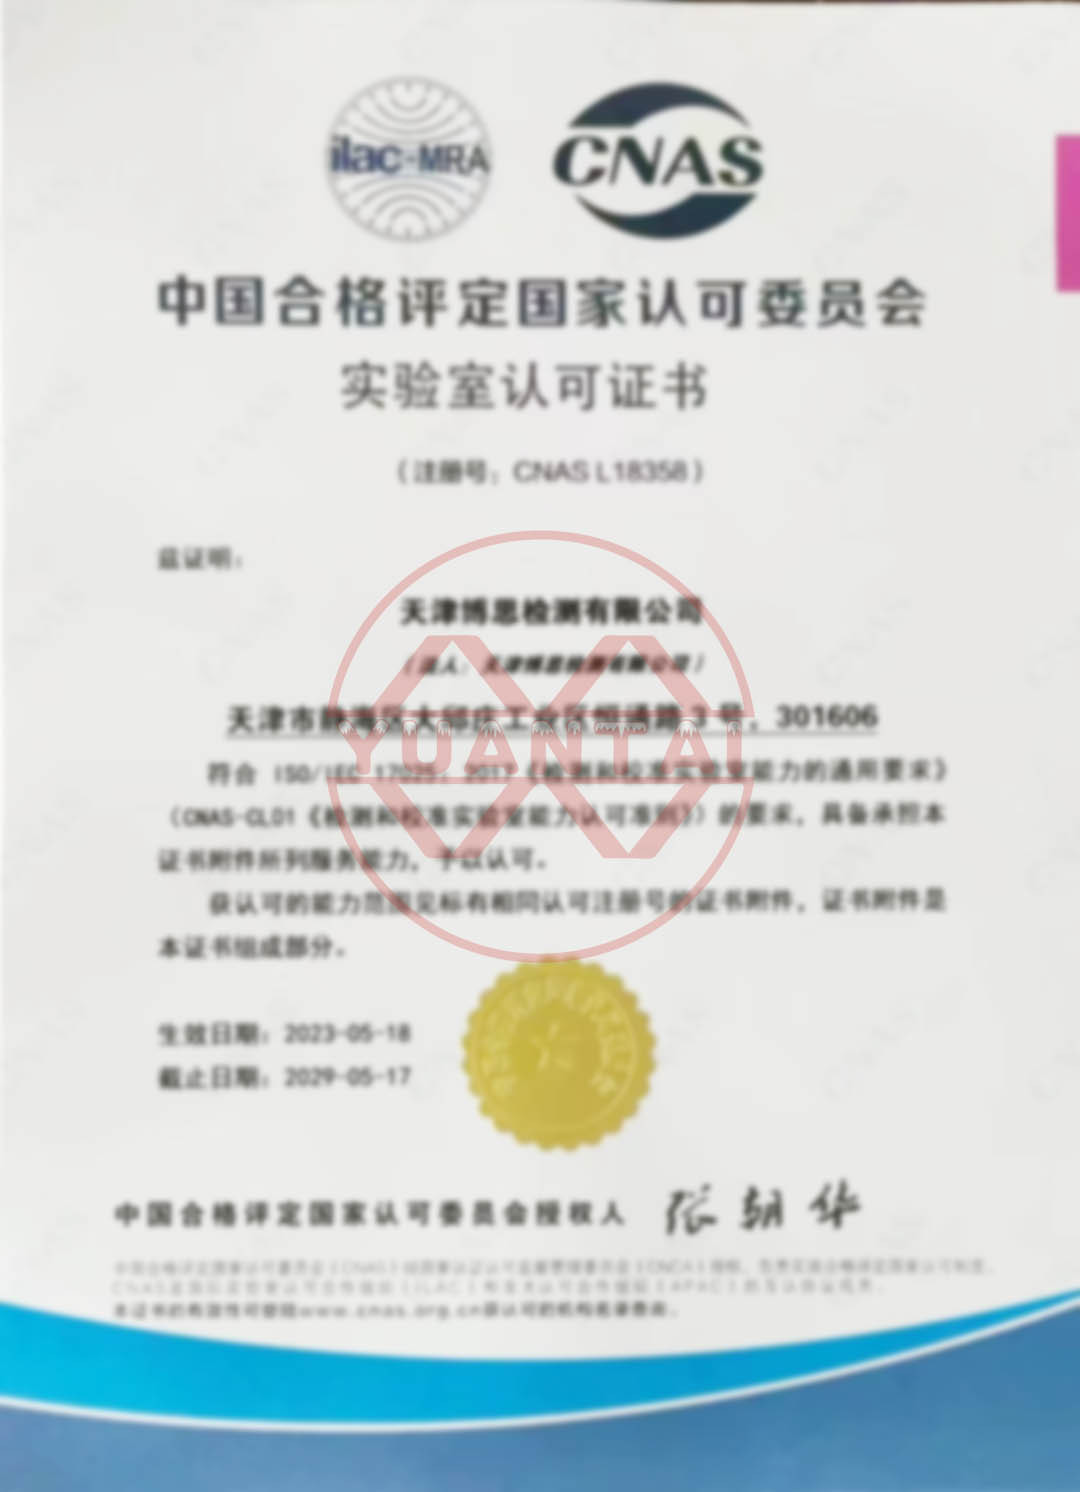 Congratulations! The Bosi Testing Team under Yuantai Derun has obtained the CNAS certification of the laboratory!